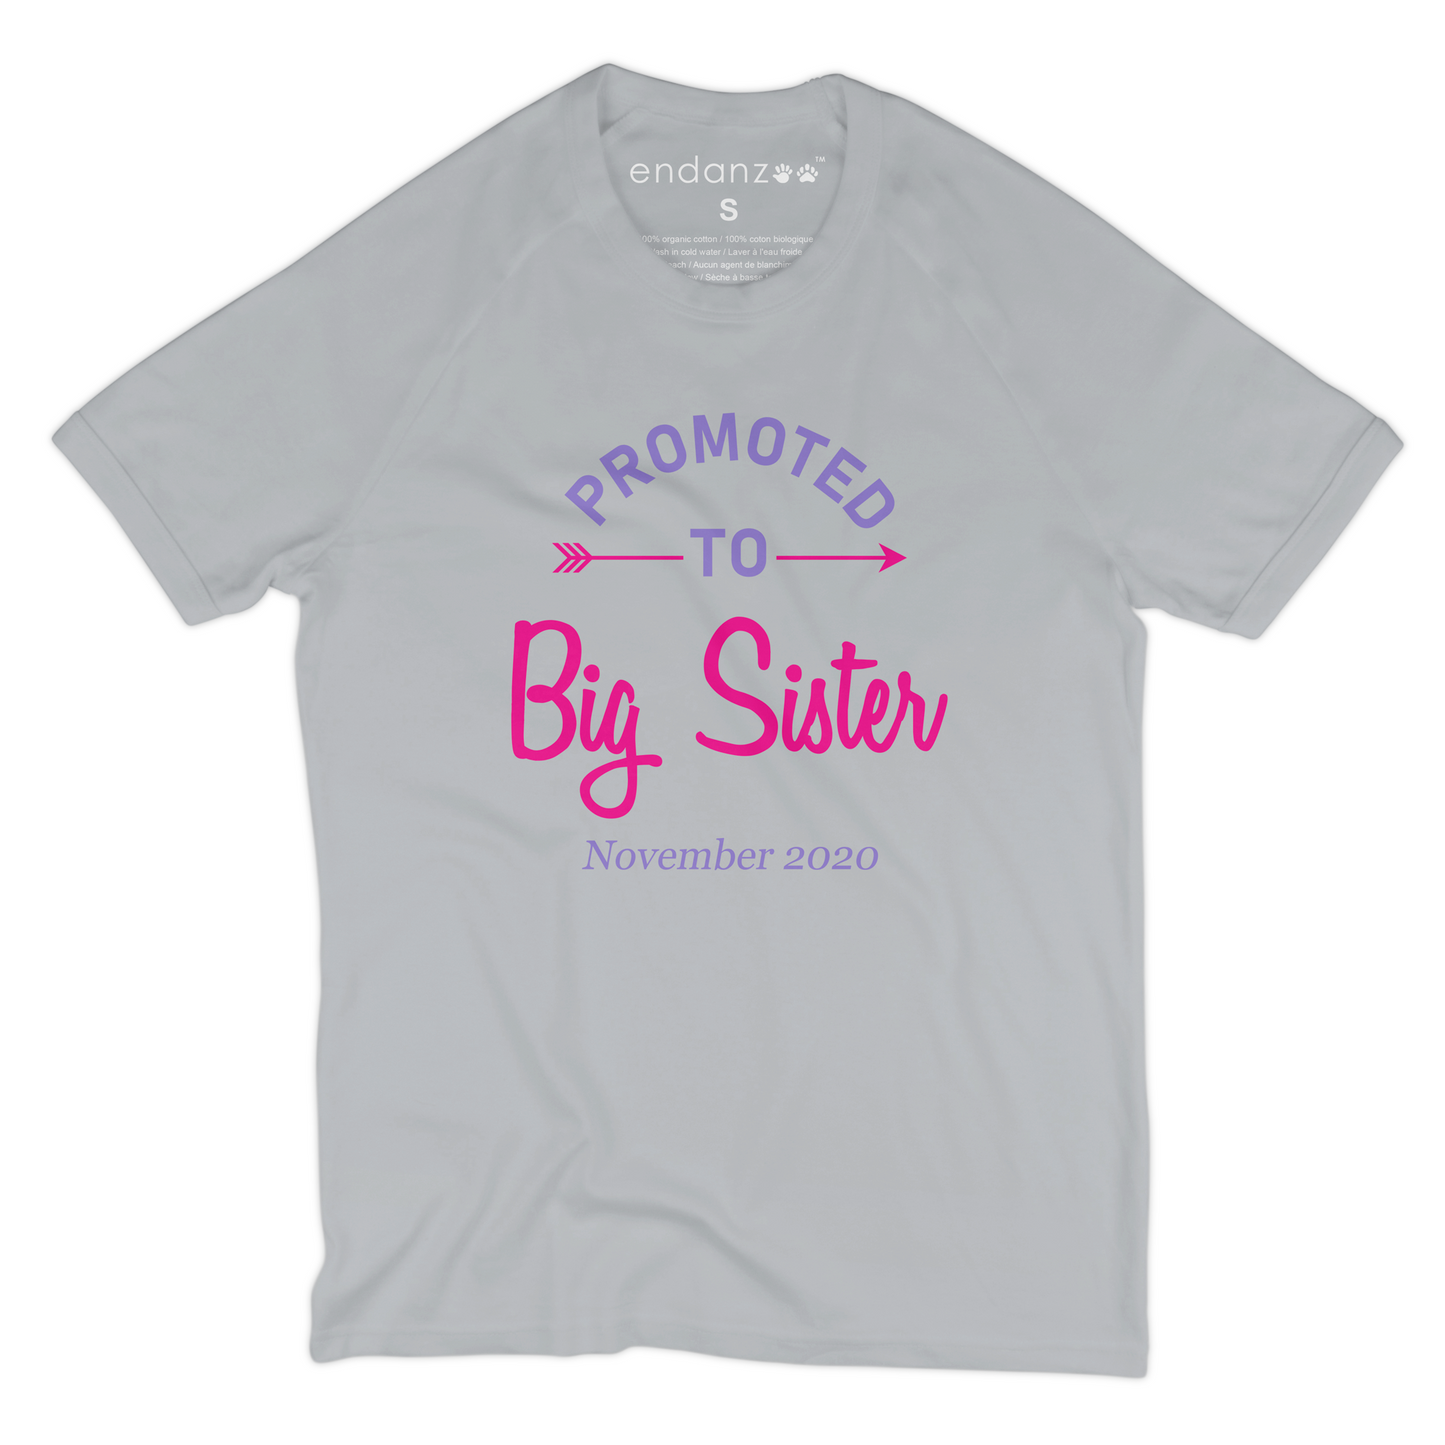 [Personalized] Promoted To Big Sister Organic Kids Tee Shirt I Pregnancy Announcement Kids Tshirt